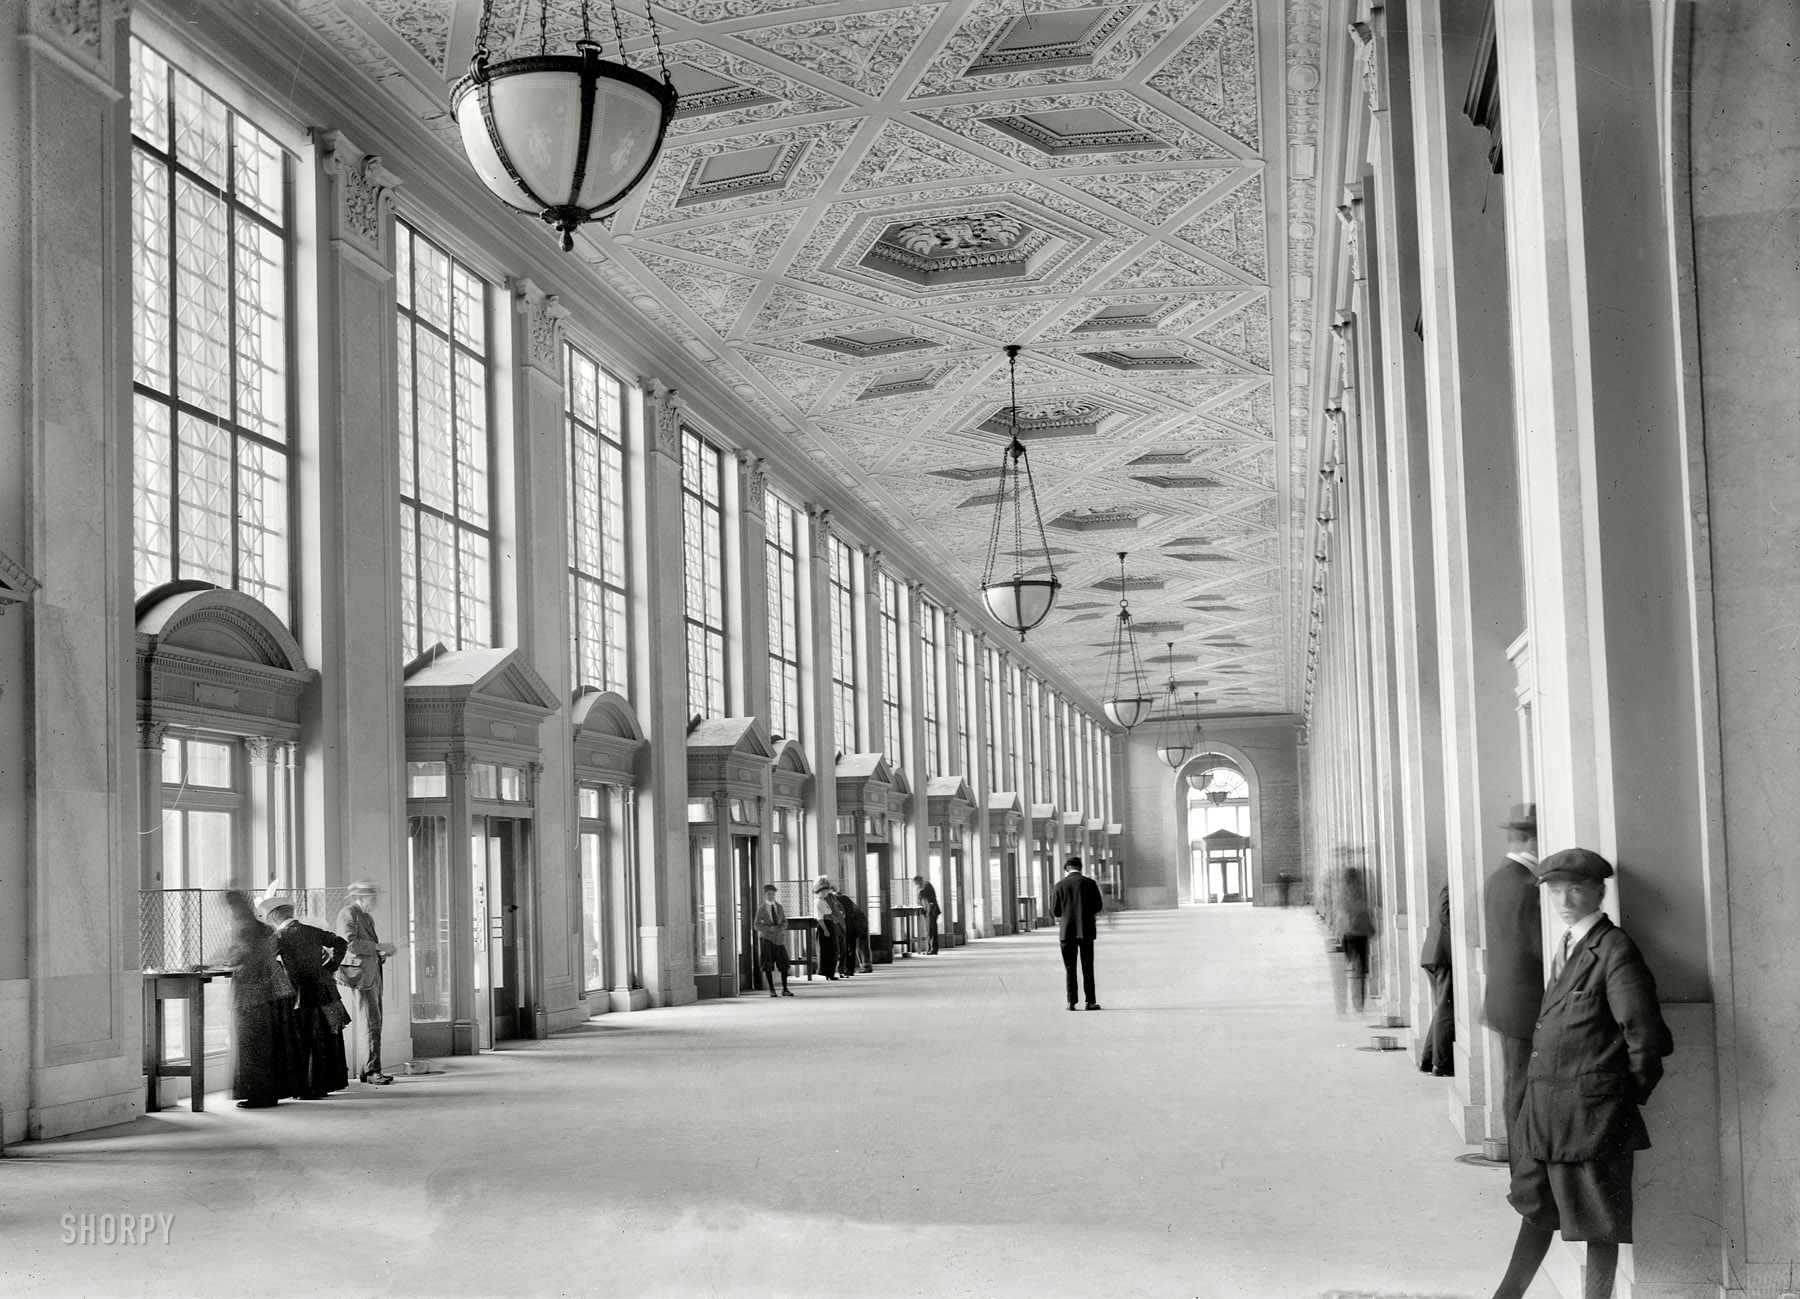 Circa 1916. "New York Post Office, main corridor." Snapshot from the Golden Age of Mail. 5x7 glass negative, George Grantham Bain Collection. View full size.